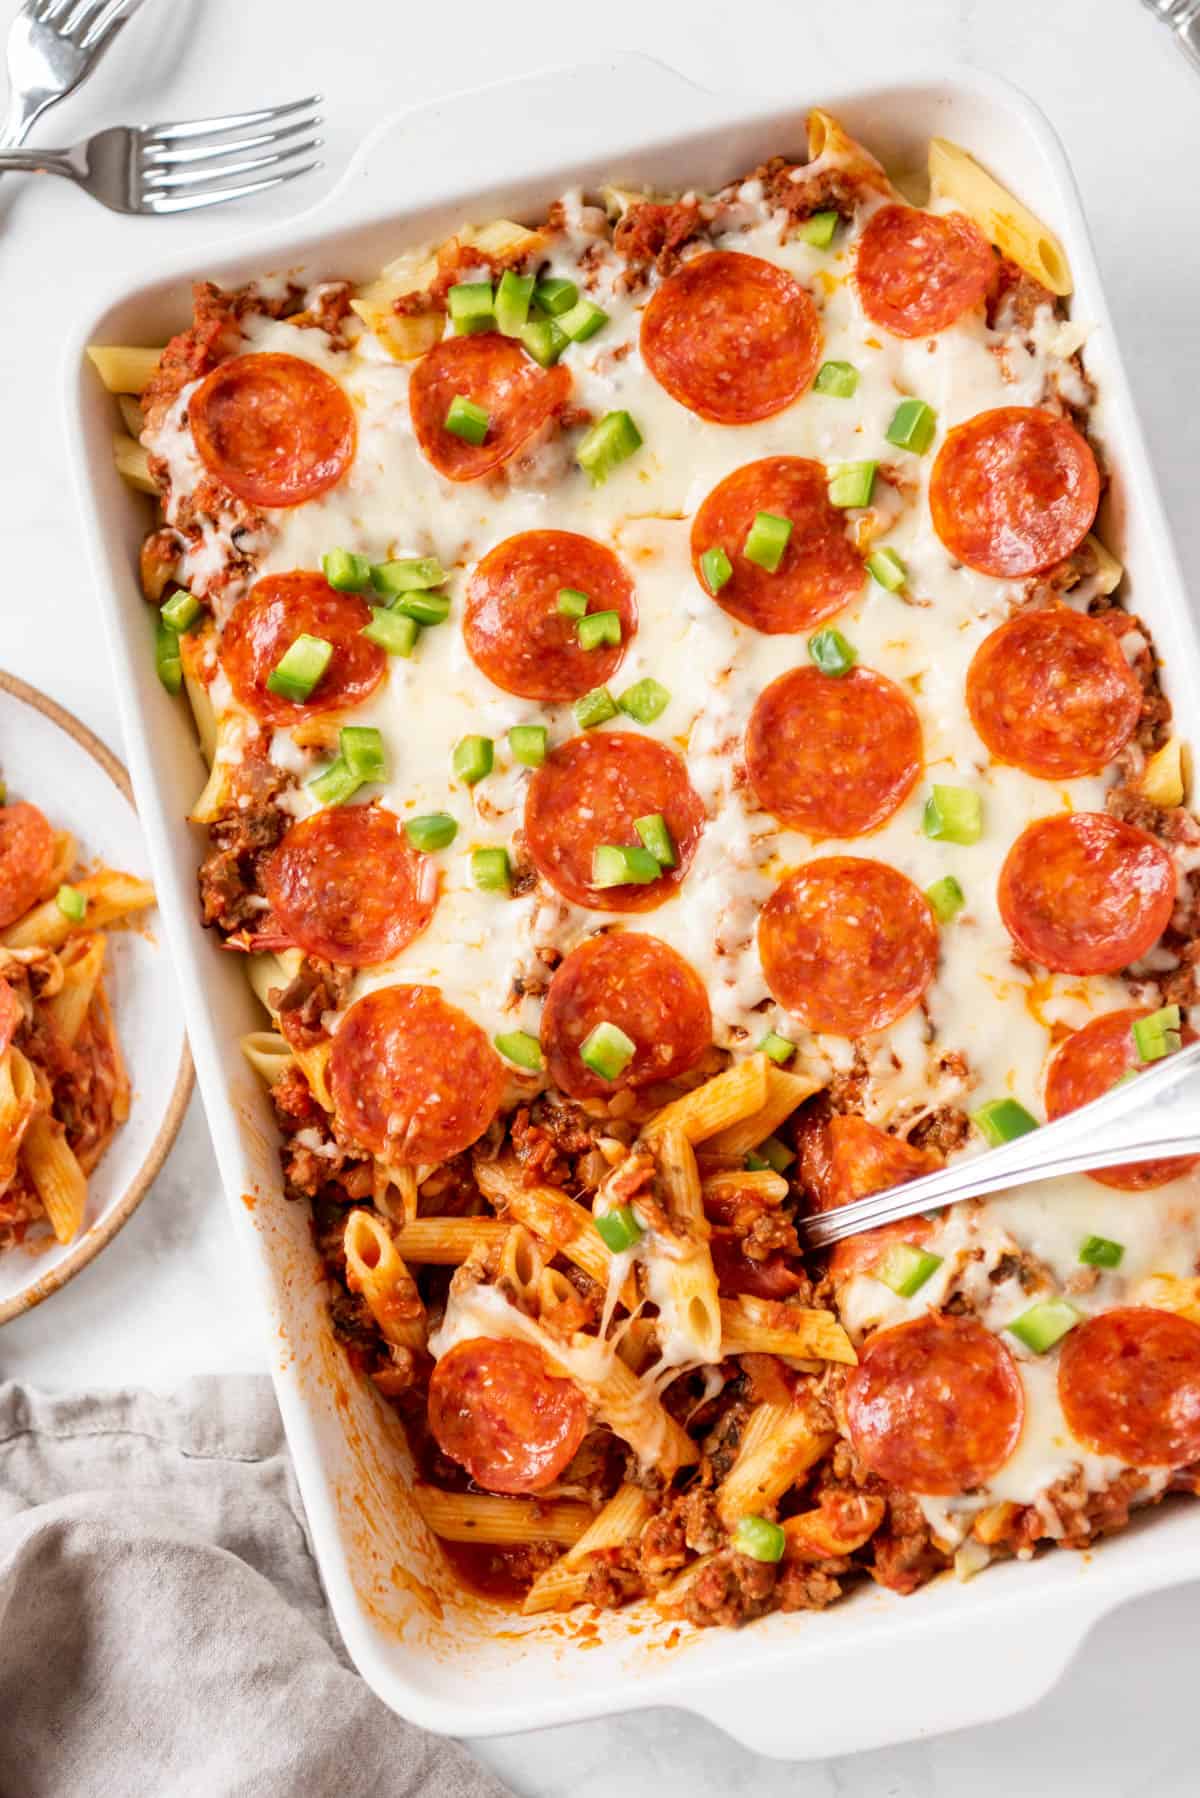 A large casserole dish of pizza casserole with a serving spoon scooping some out.